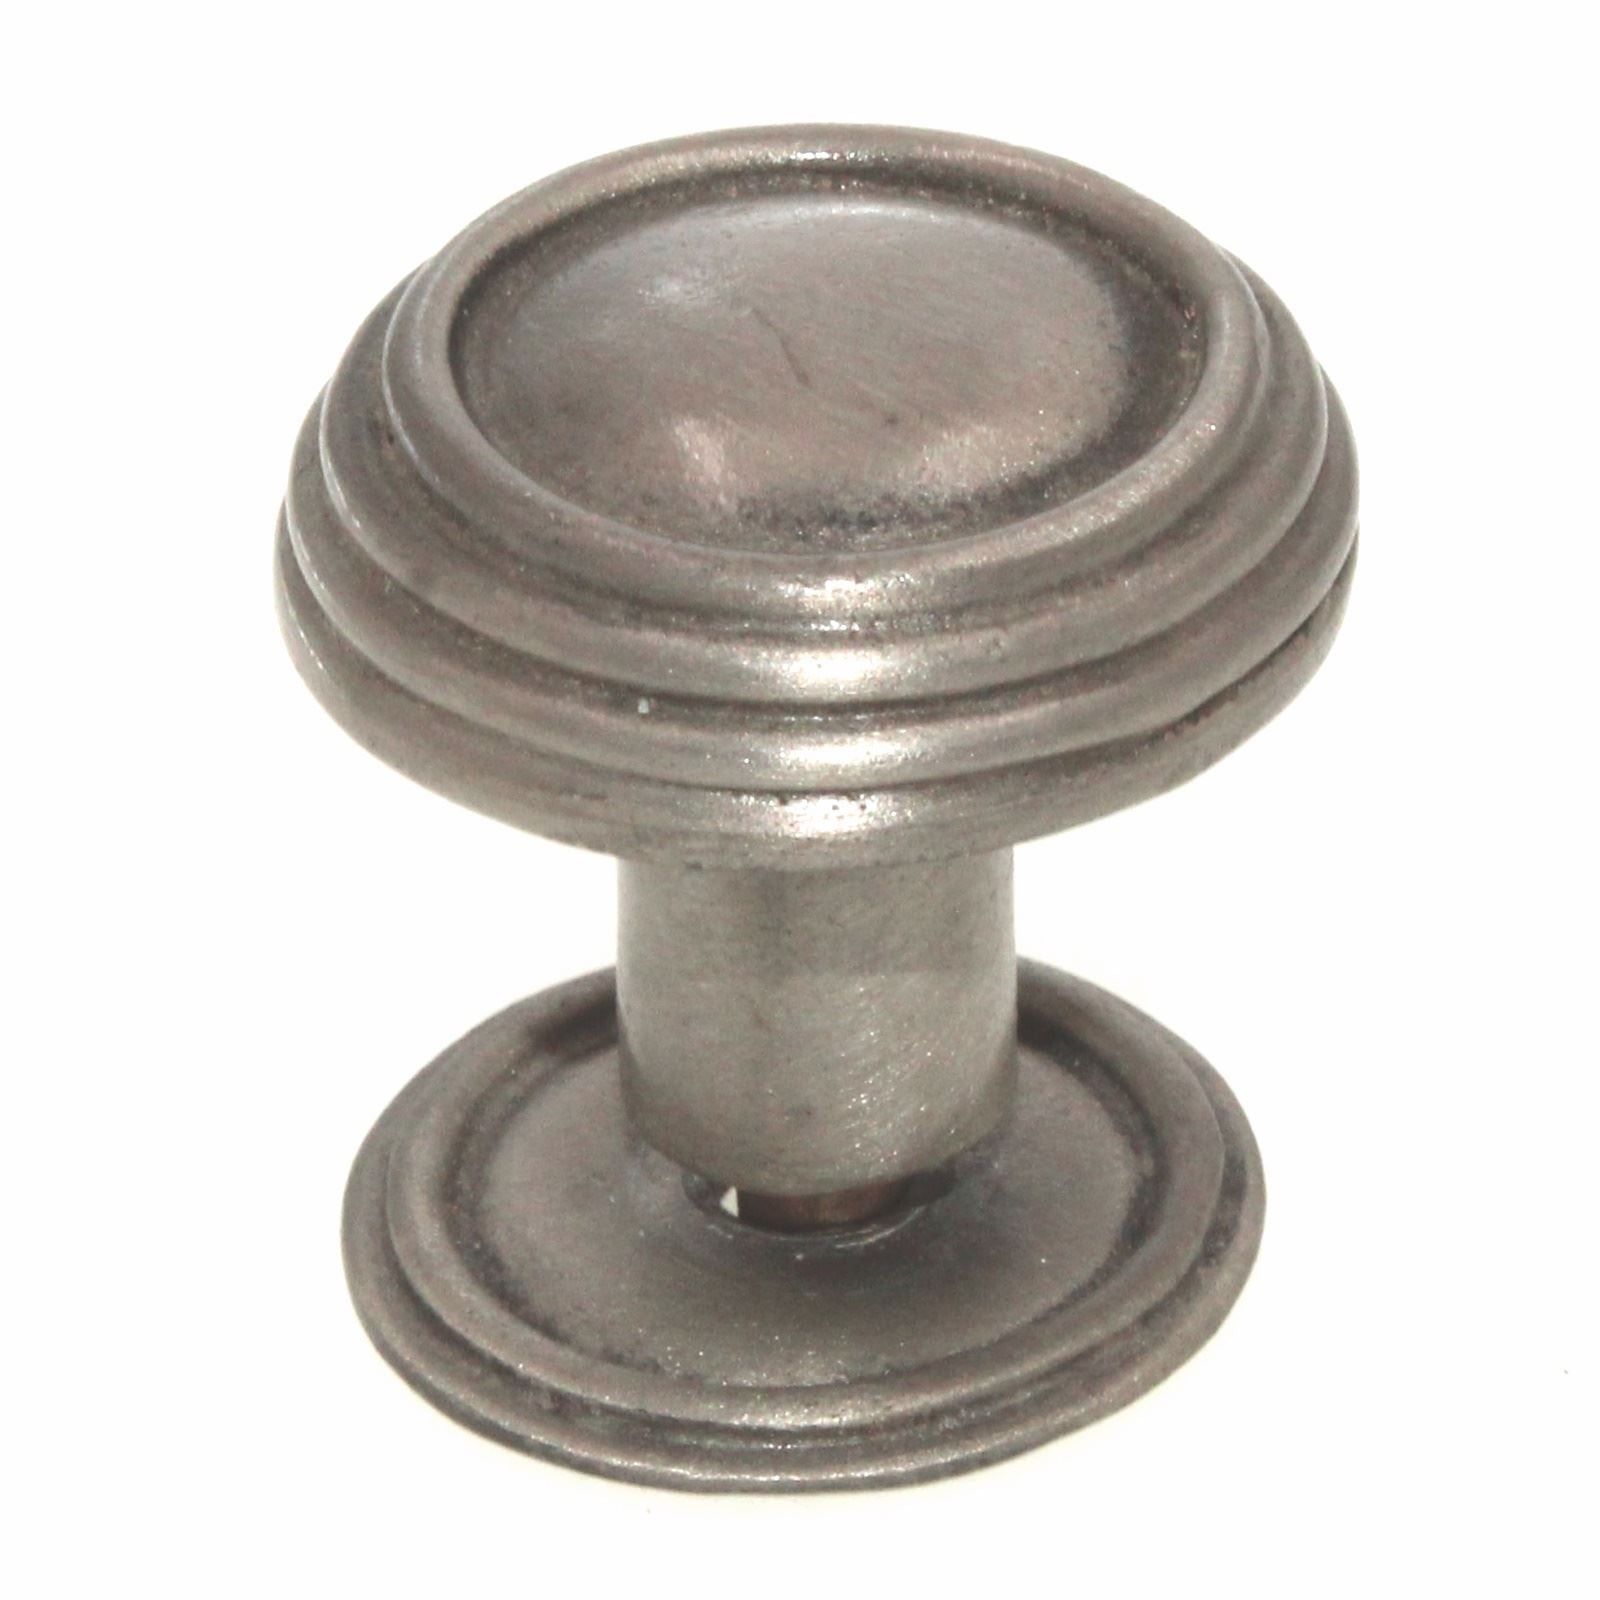 Anne at Home Rustic Sonnet Large 1 1/4" Ringed Cabinet Knob Satin Pewter 1302-20